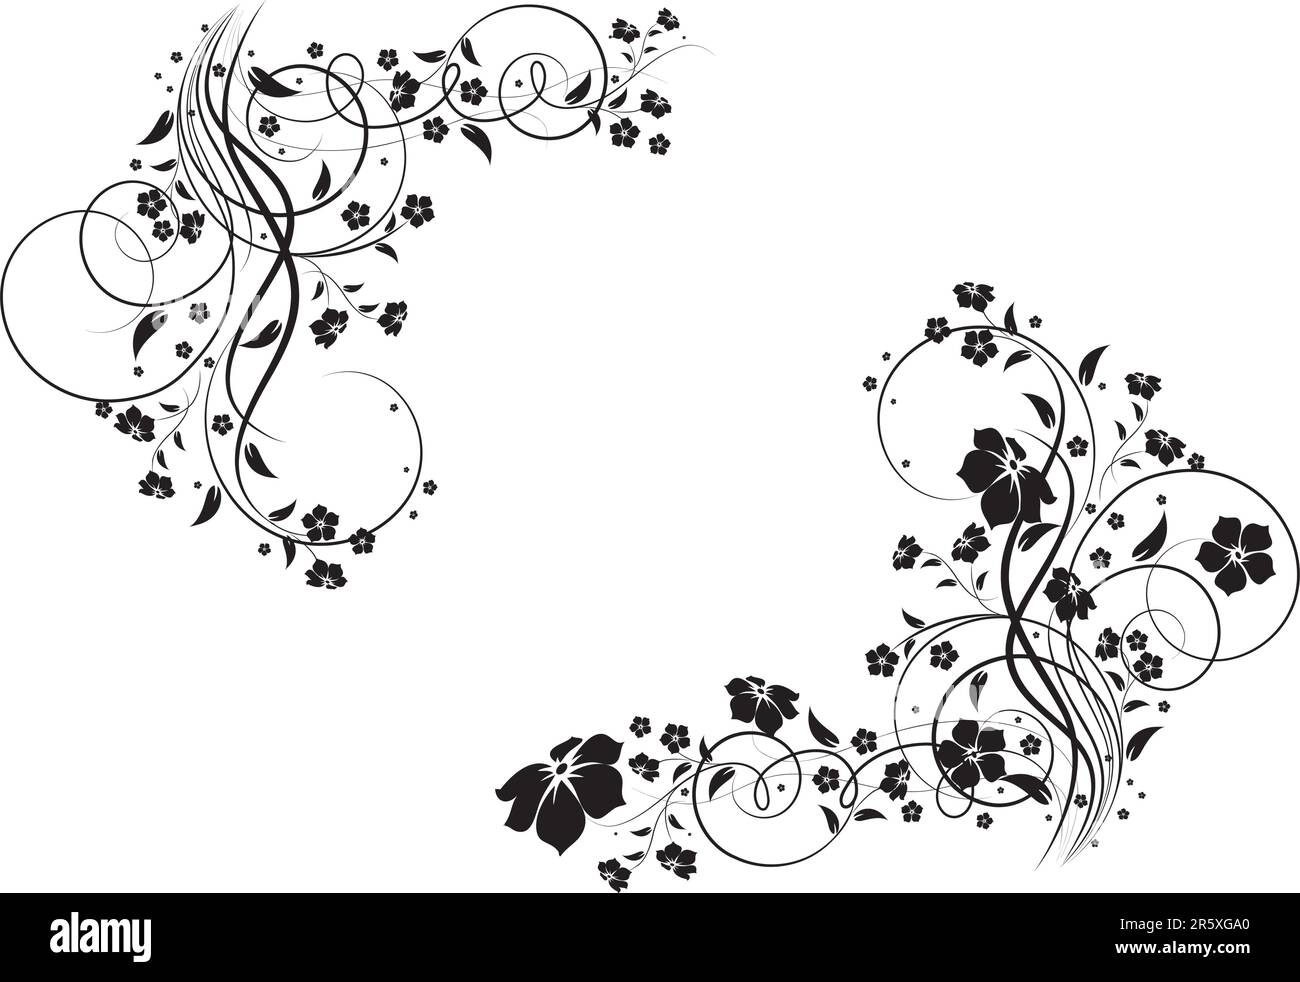 Floral illustration. Can be used for design. Stock Vector